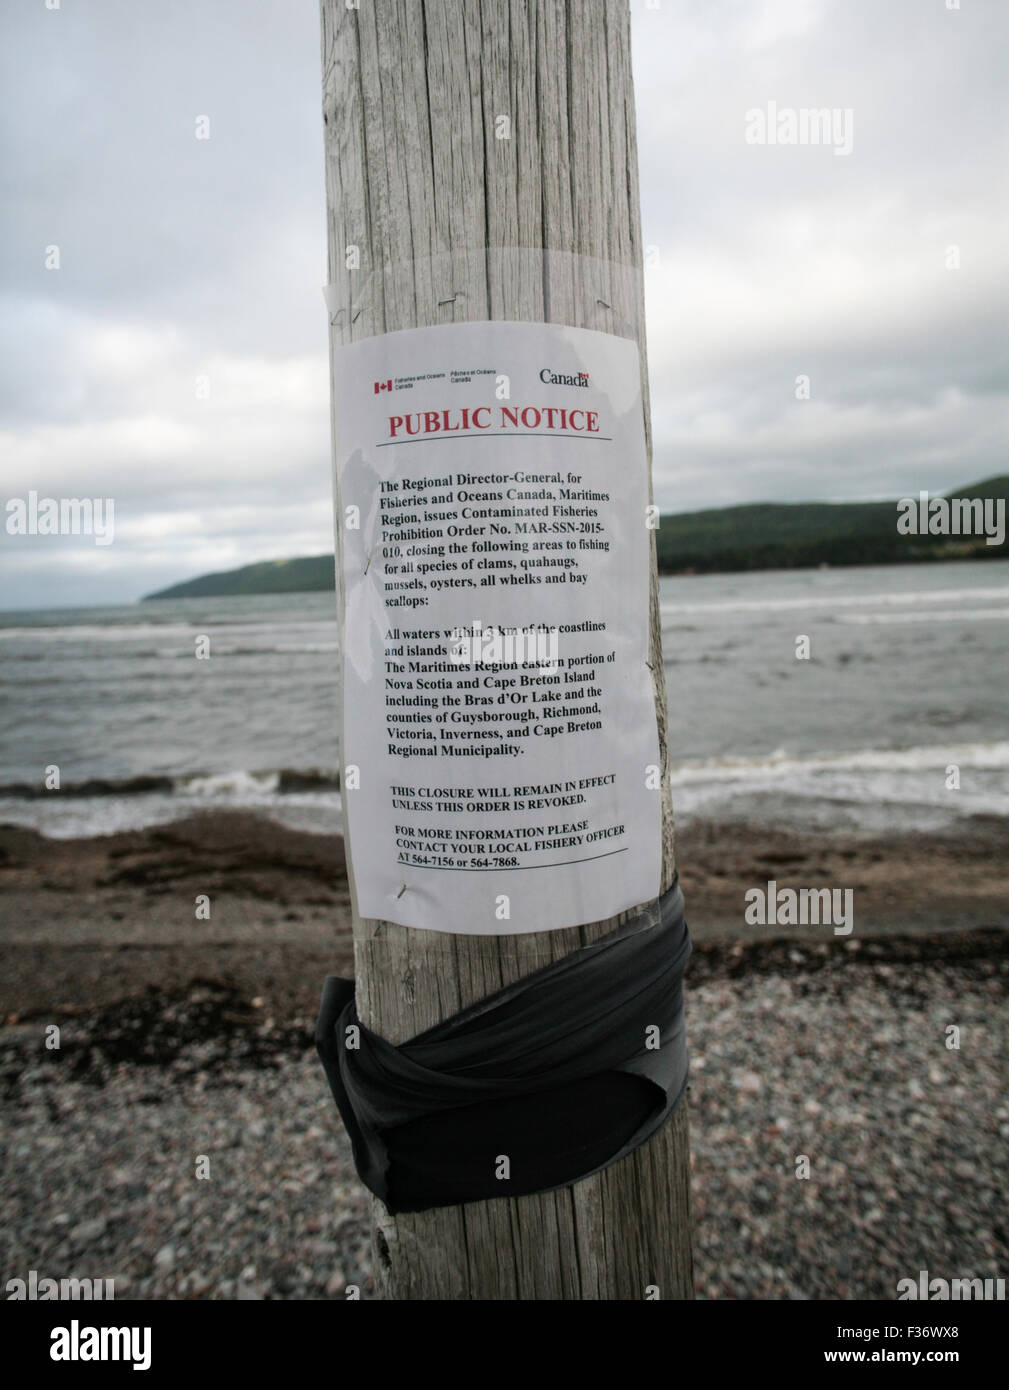 Bacteria bloom in St. Anns, Nova Scotia because of shellfish population Stock Photo